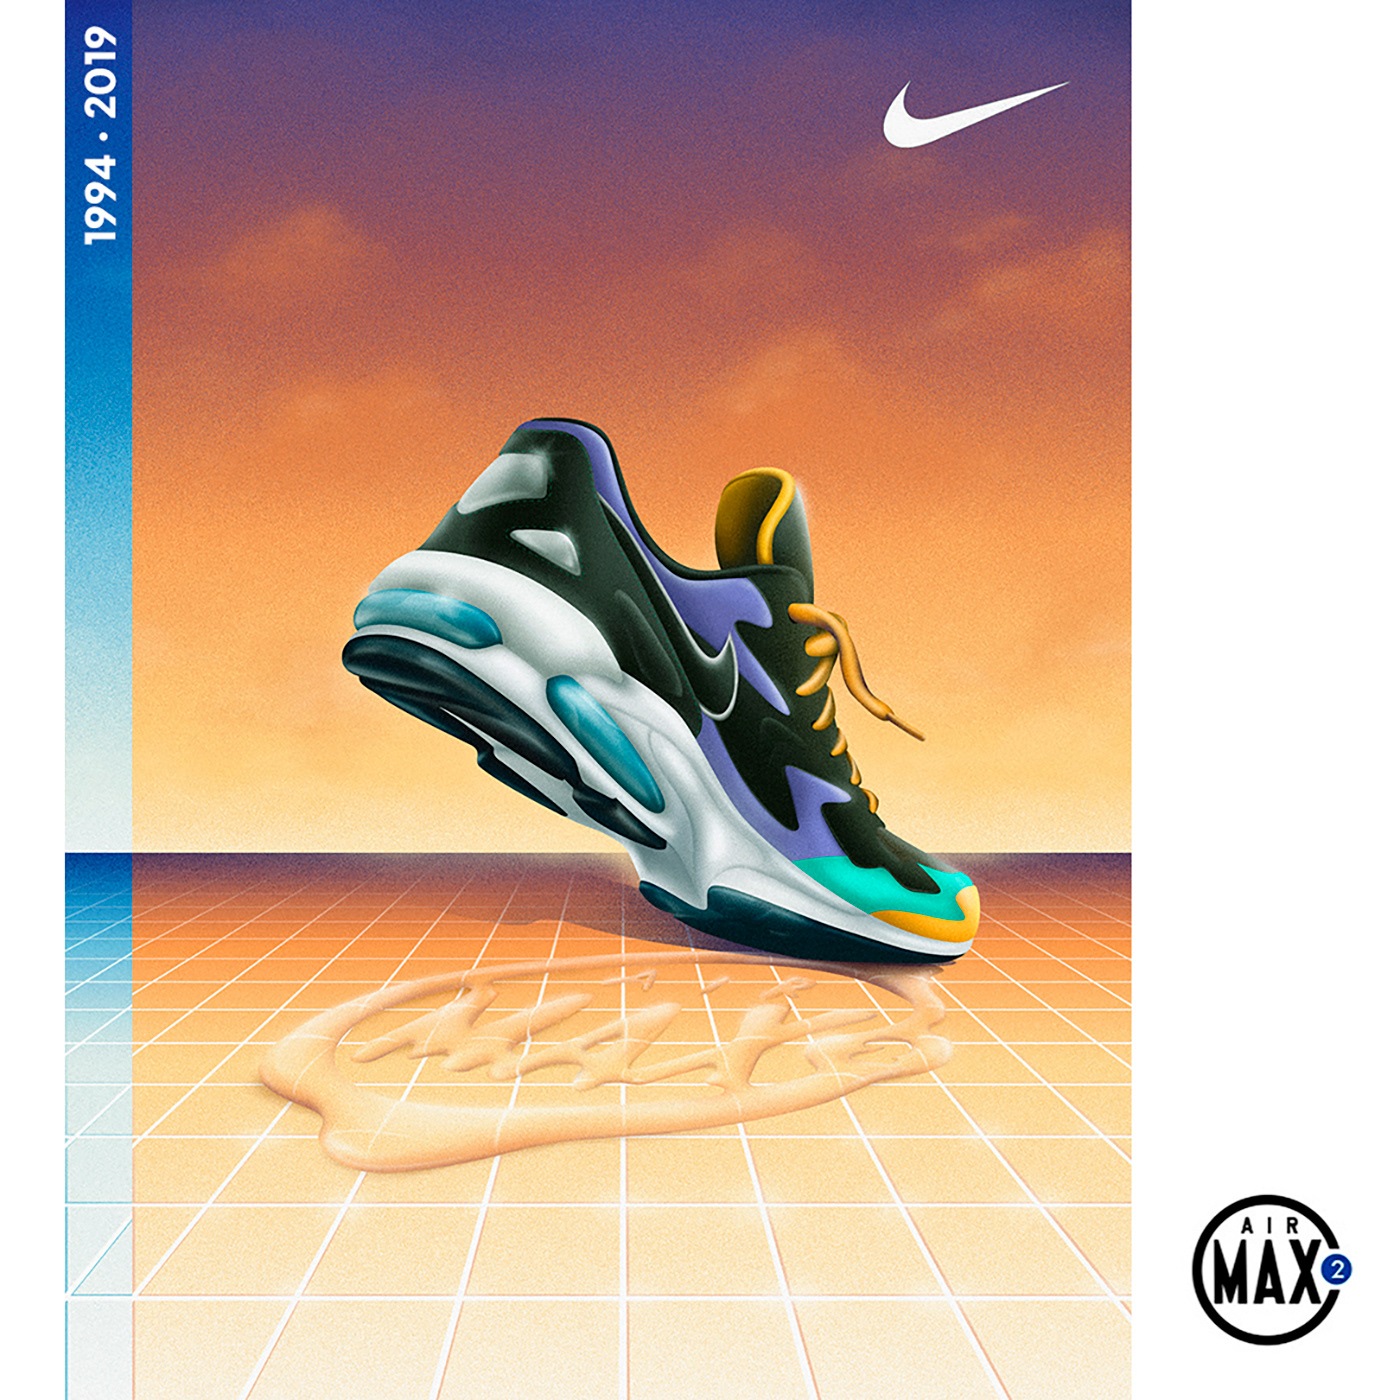 80s 90s air max airbrush ILLUSTRATION  lettering Nike shoes sneaker